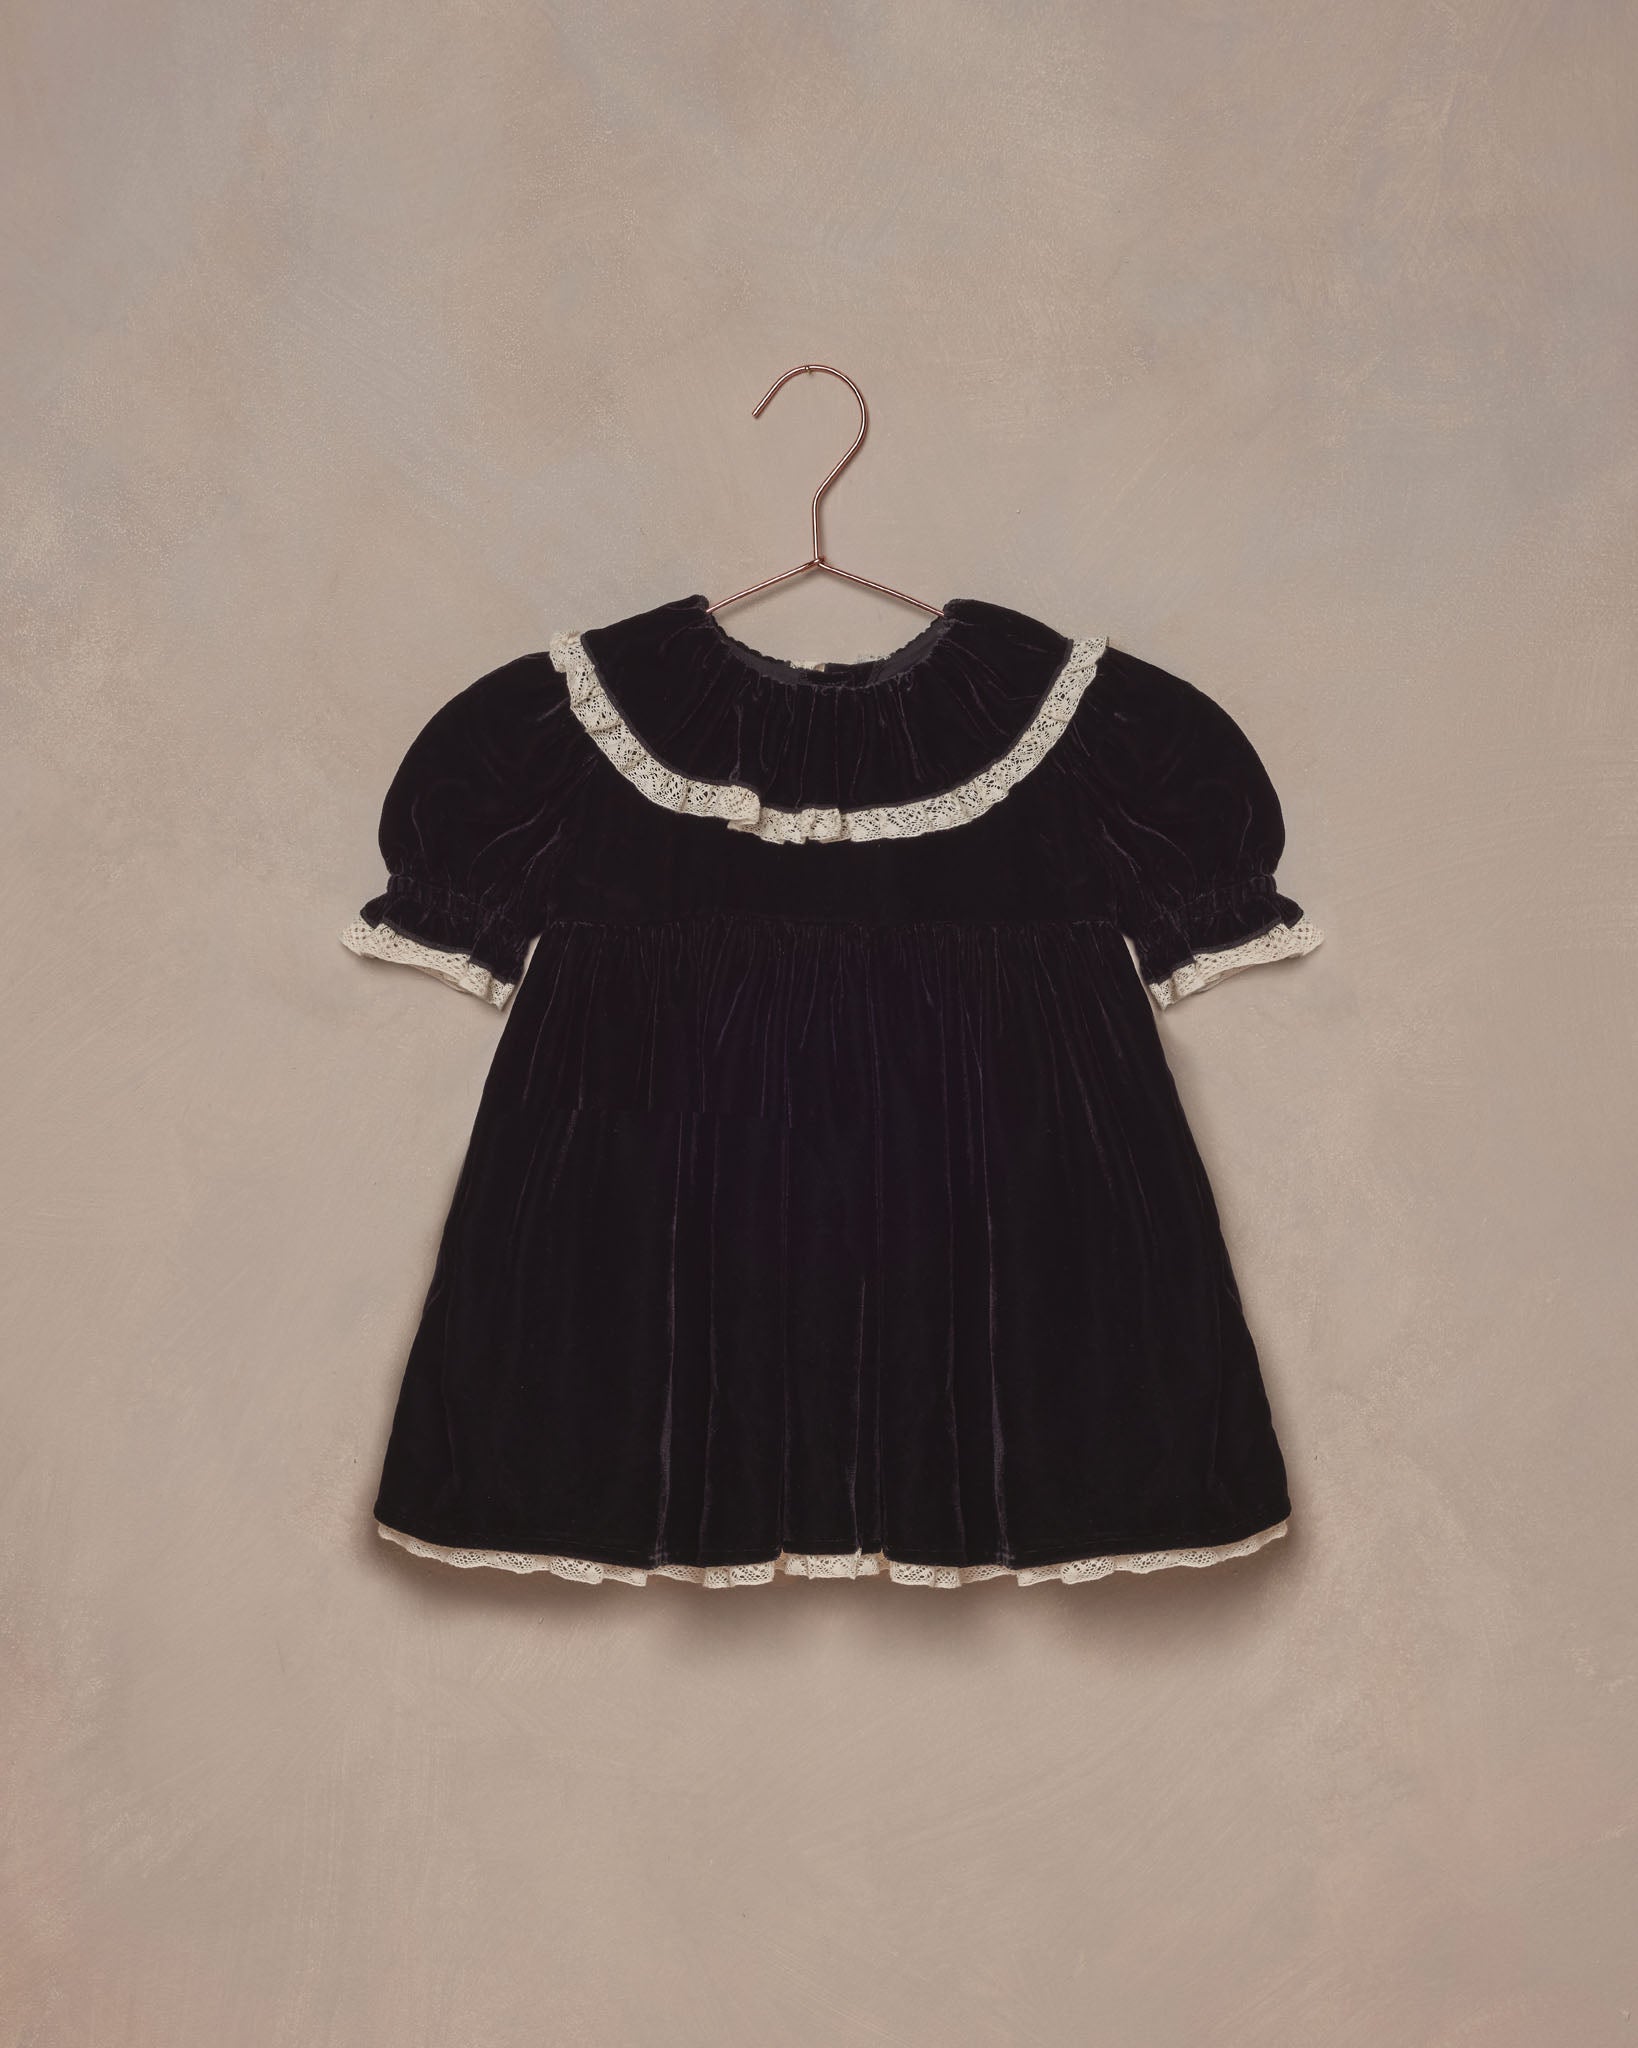 Amelia Dress || Black - Rylee + Cru | Kids Clothes | Trendy Baby Clothes | Modern Infant Outfits |